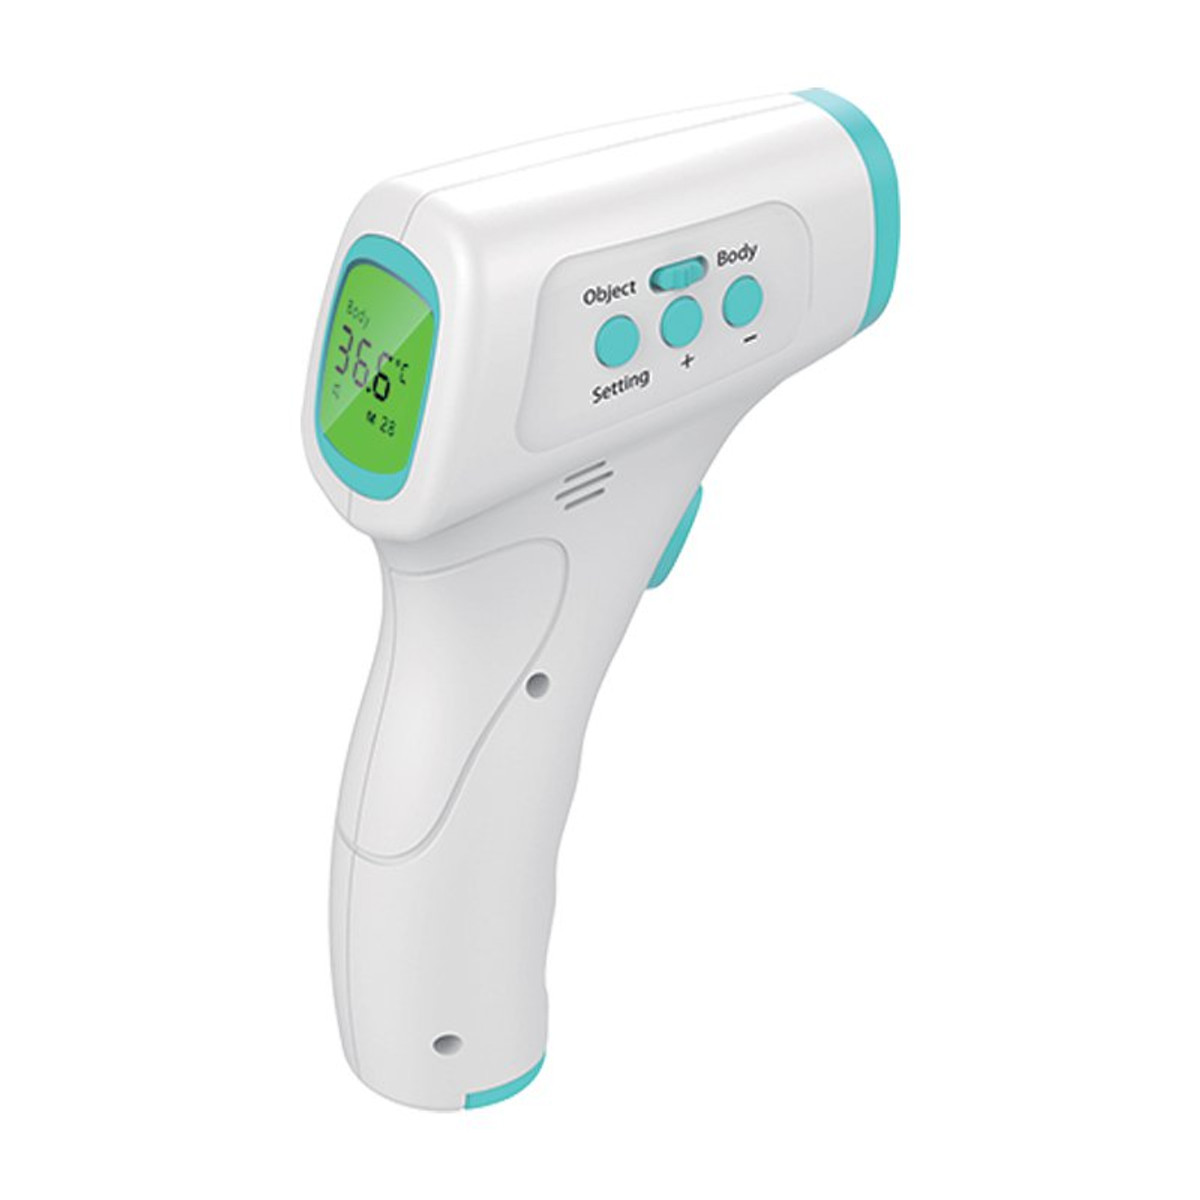 https://cdn11.bigcommerce.com/s-9q2m2xw7hz/images/stencil/1200x1200/products/168/475/jrt-infrared-thermometer__21246__23801.1629396187.jpg?c=1